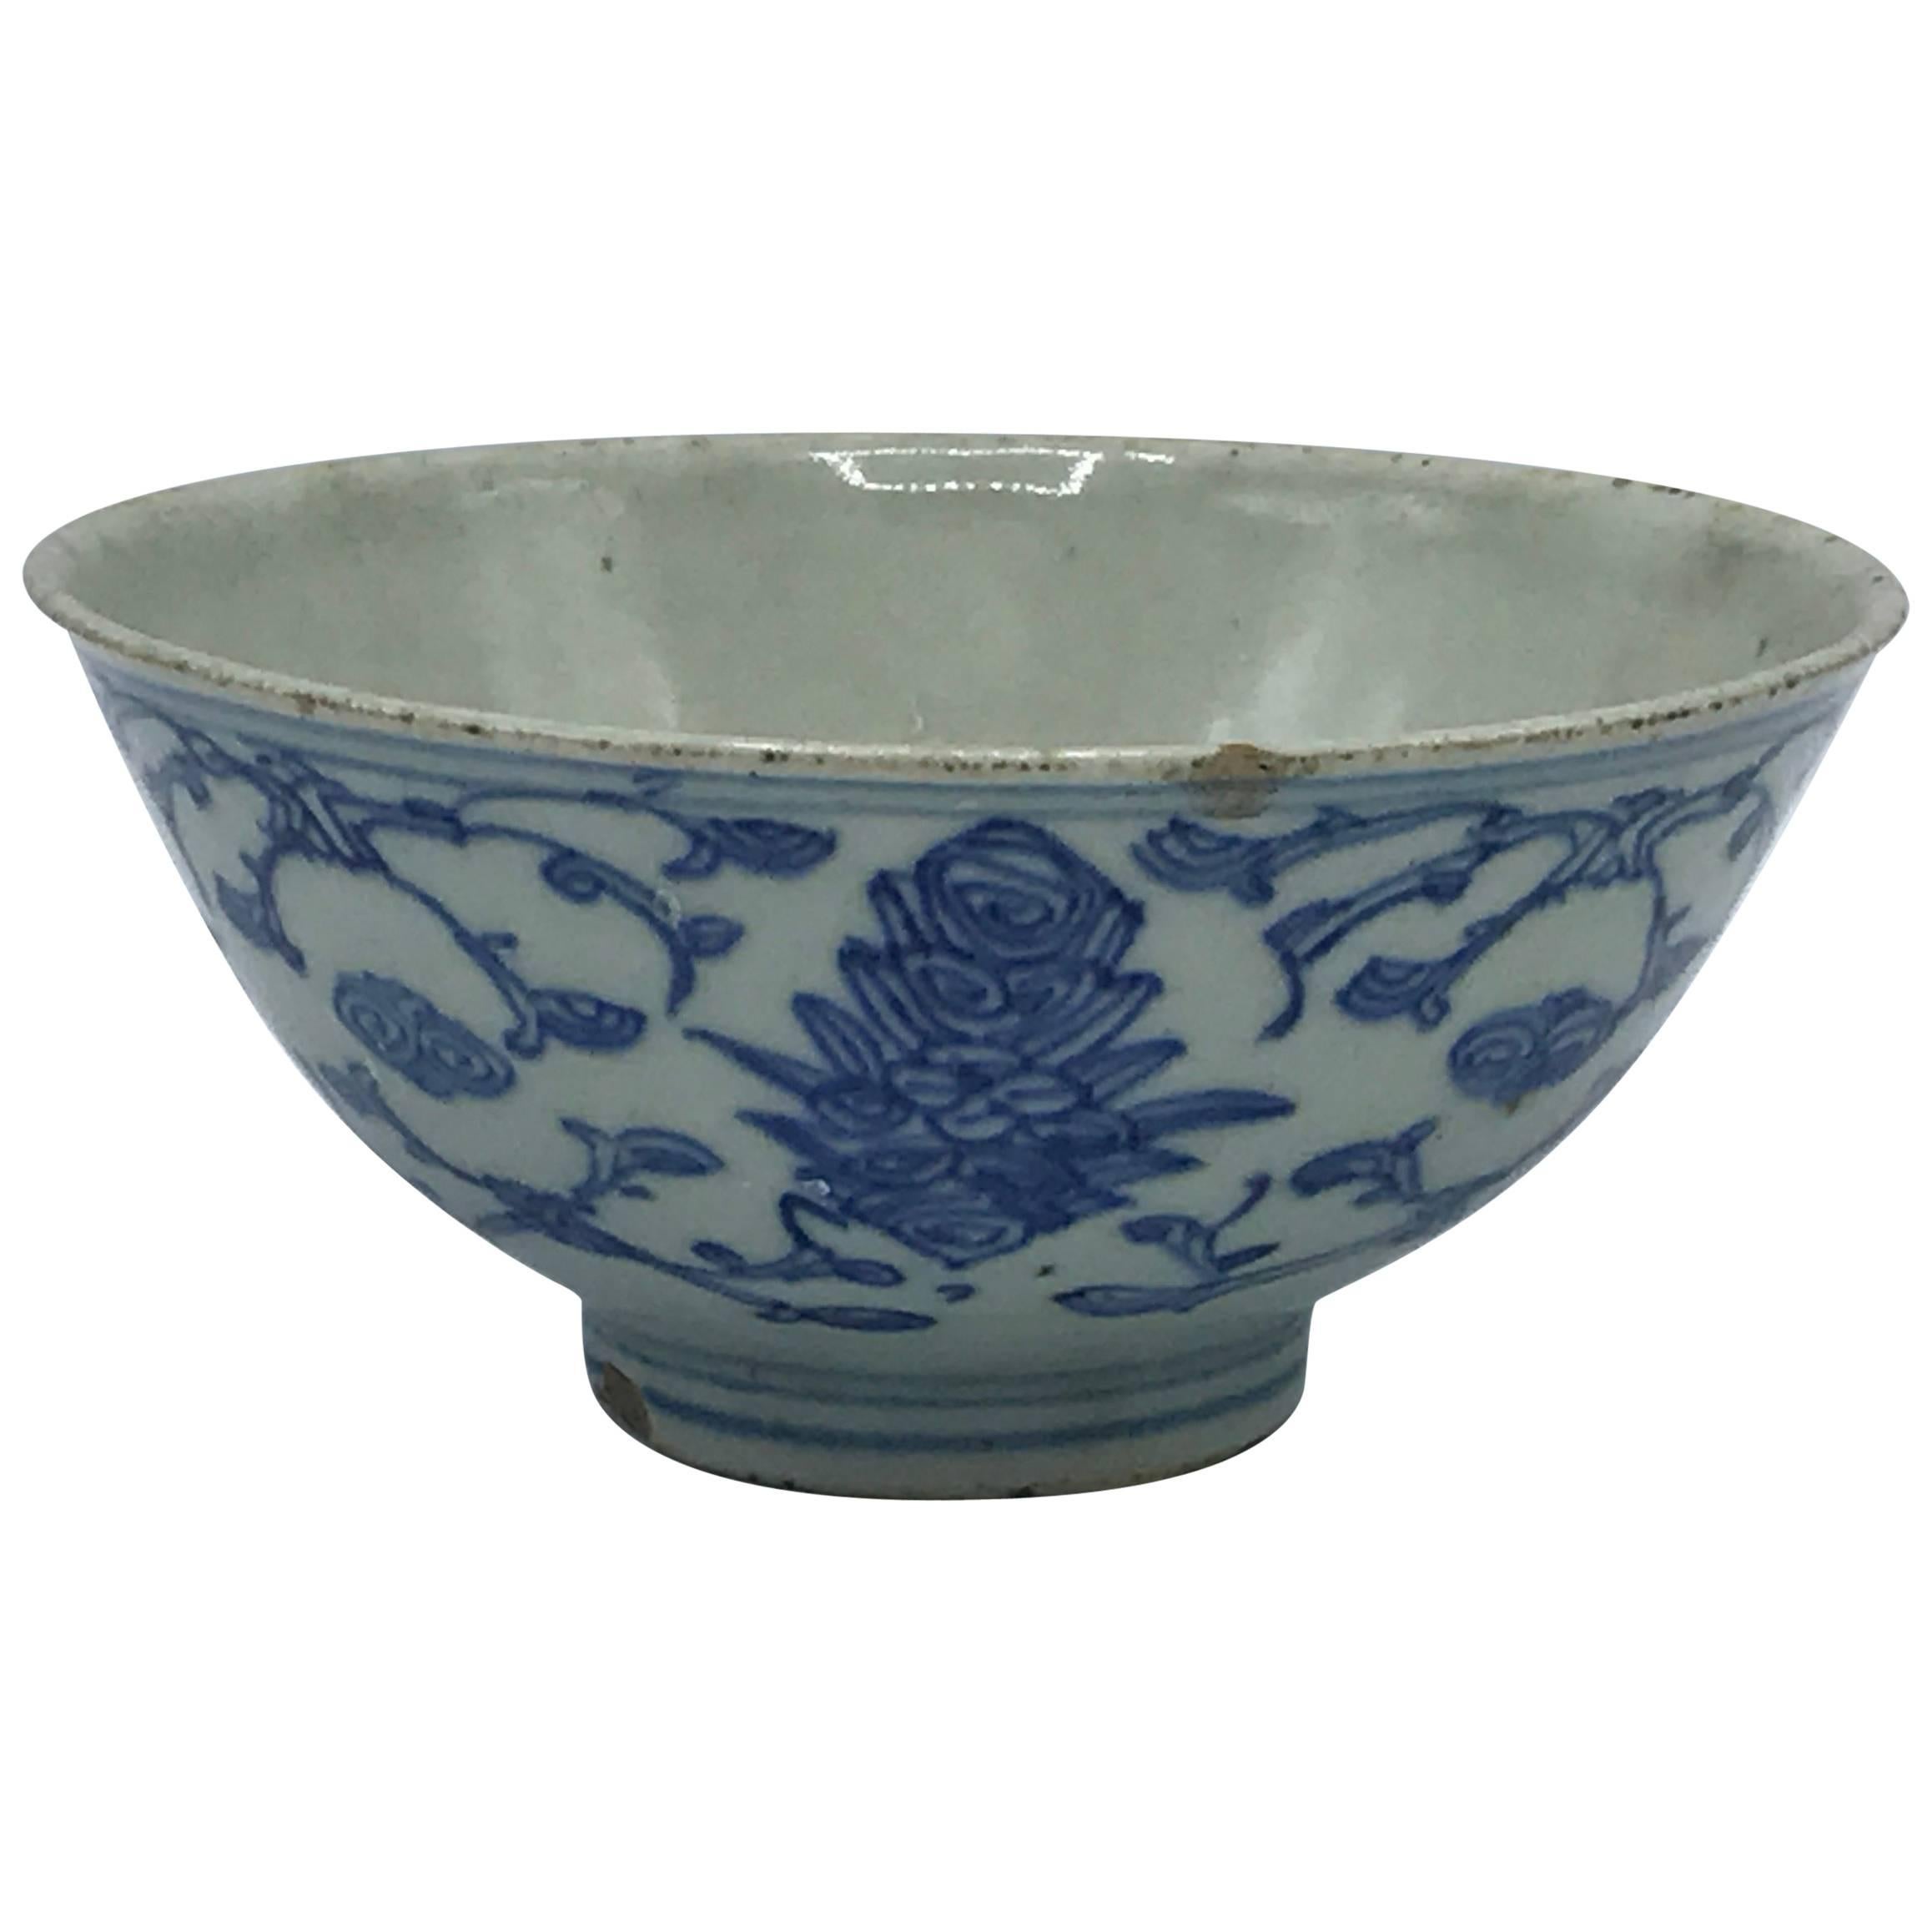 19th Century Qing Dynasty Blue and White Bowl with Floral Motif For Sale